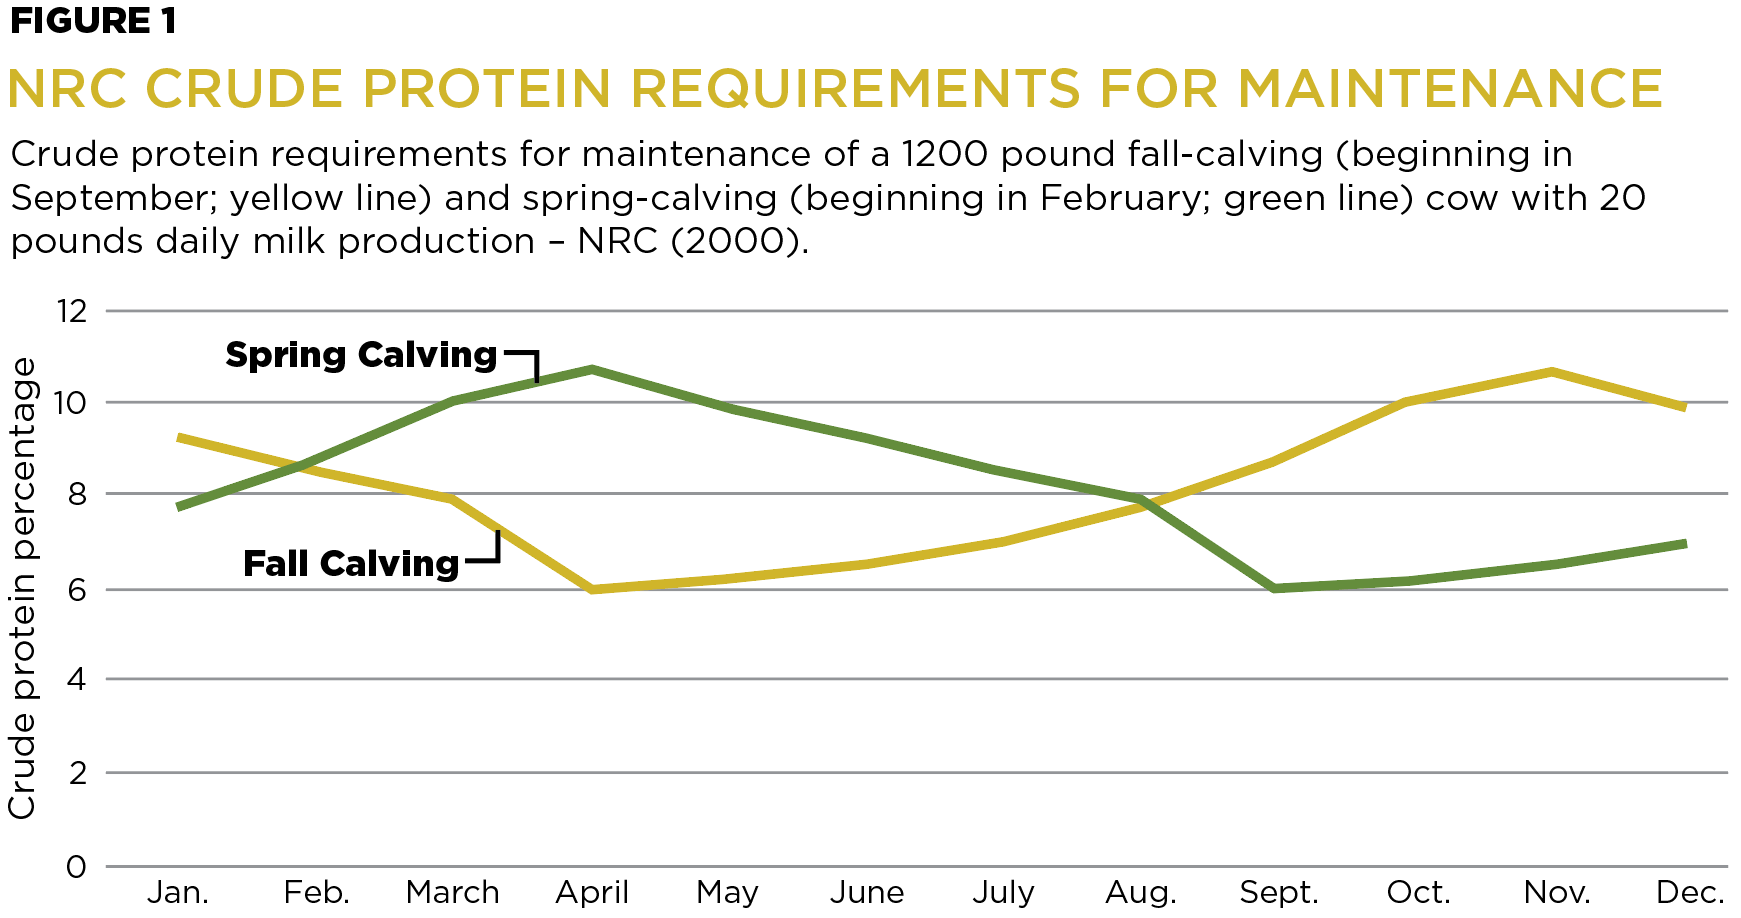 Figure 1: NRC Crude Protein Requirements for Maintenance. Crude protein requirements for maintenance of a 1200 pound fall-calving (beginning in September; yellow line) and spring-calving (beginning in February; green line) cow with 20 pounds daily milk production – NRC (2000).